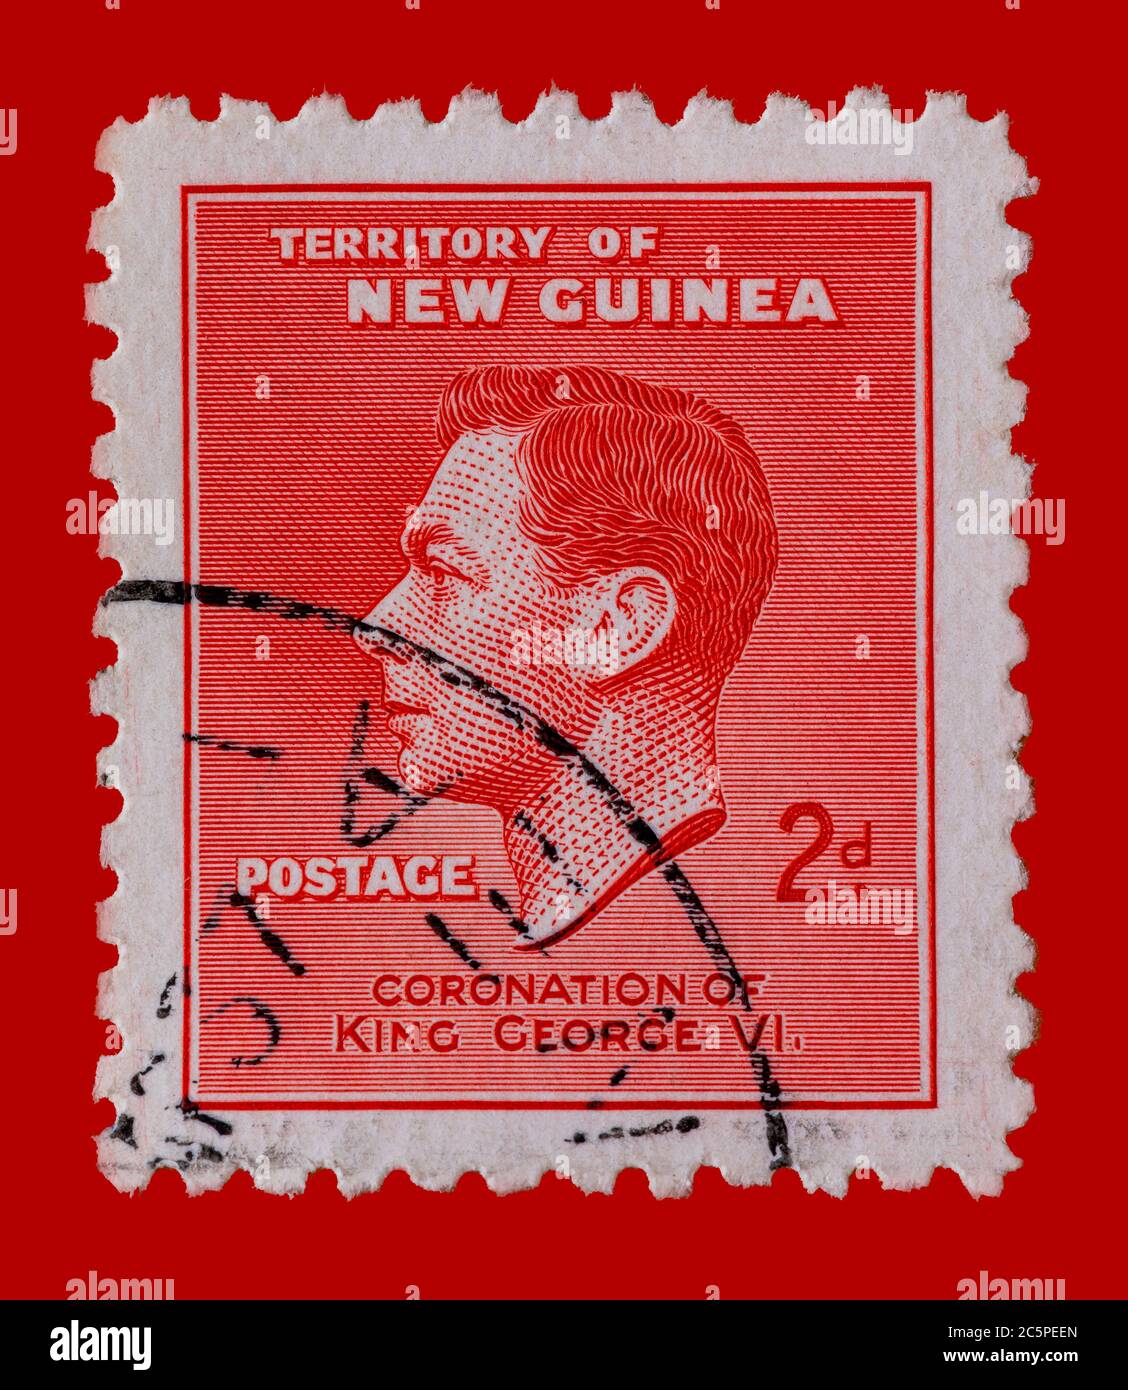 Cancelled postage stamp bearing King George VI.  Printed around 1937 with a face value of 2d or two pence. Stock Photo